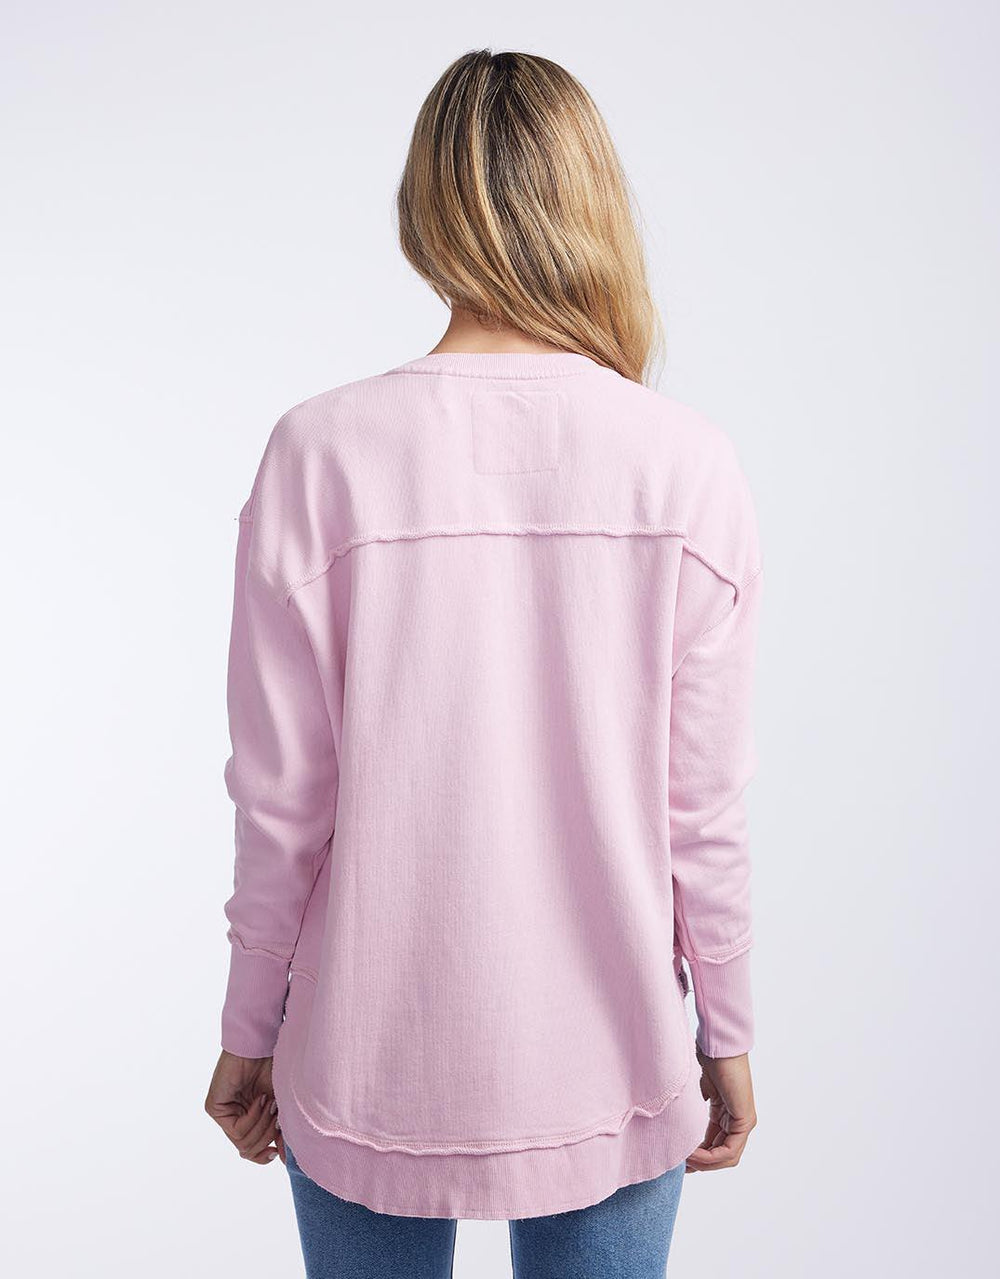 Foxwood - Simplified Crew - Blossom - White & Co Living Jumpers